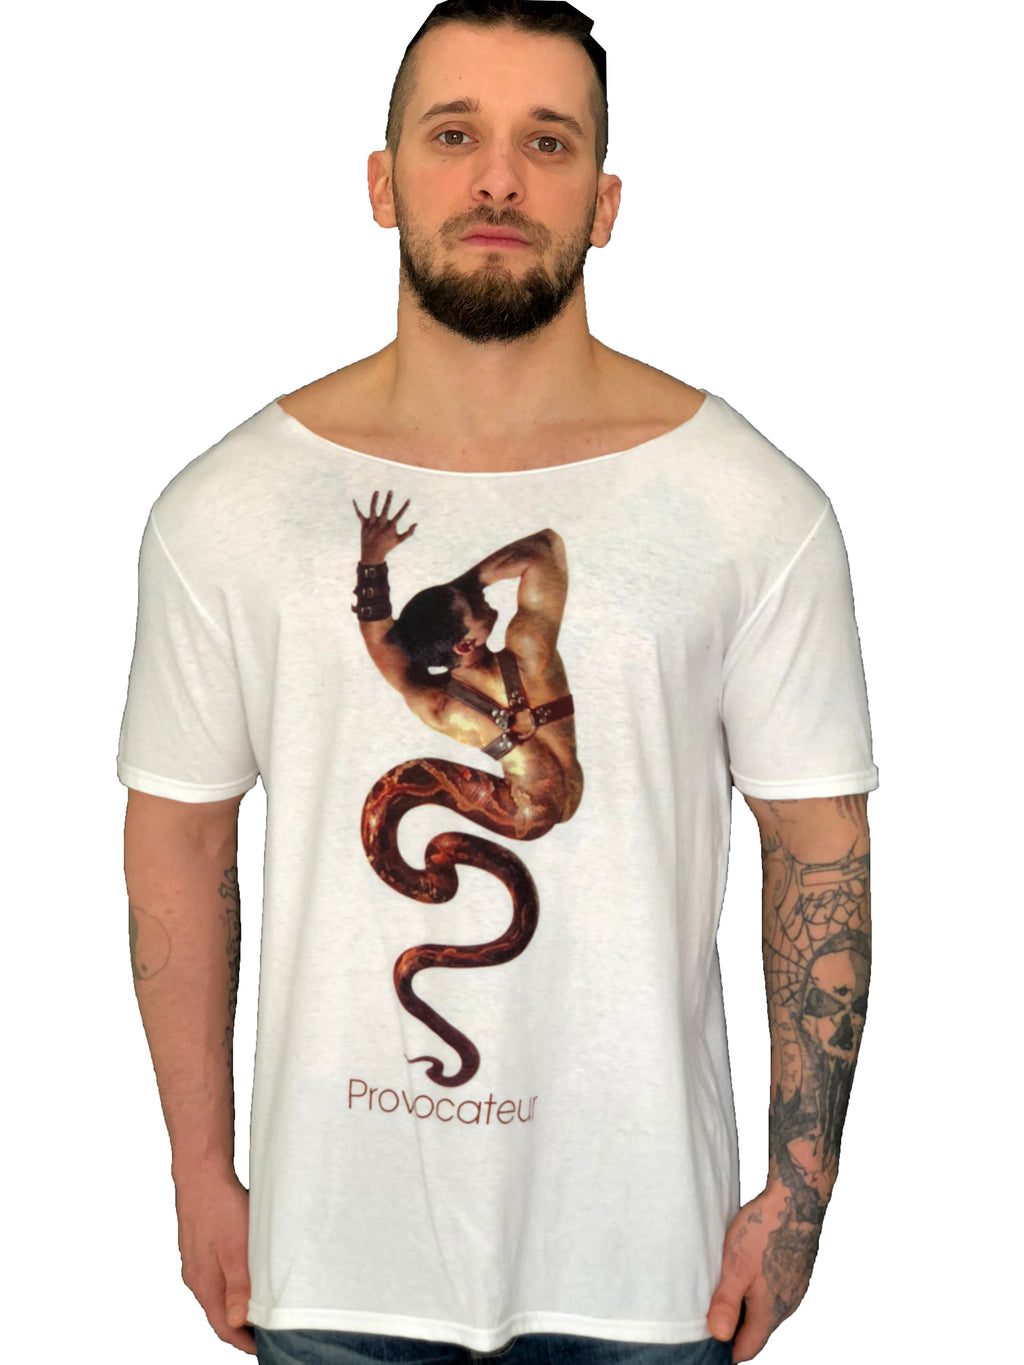 Men T-Shirt "Provocateur Inspired Leather Bondage Harness" White by iacobuccyounes Italy - Brit Boss 